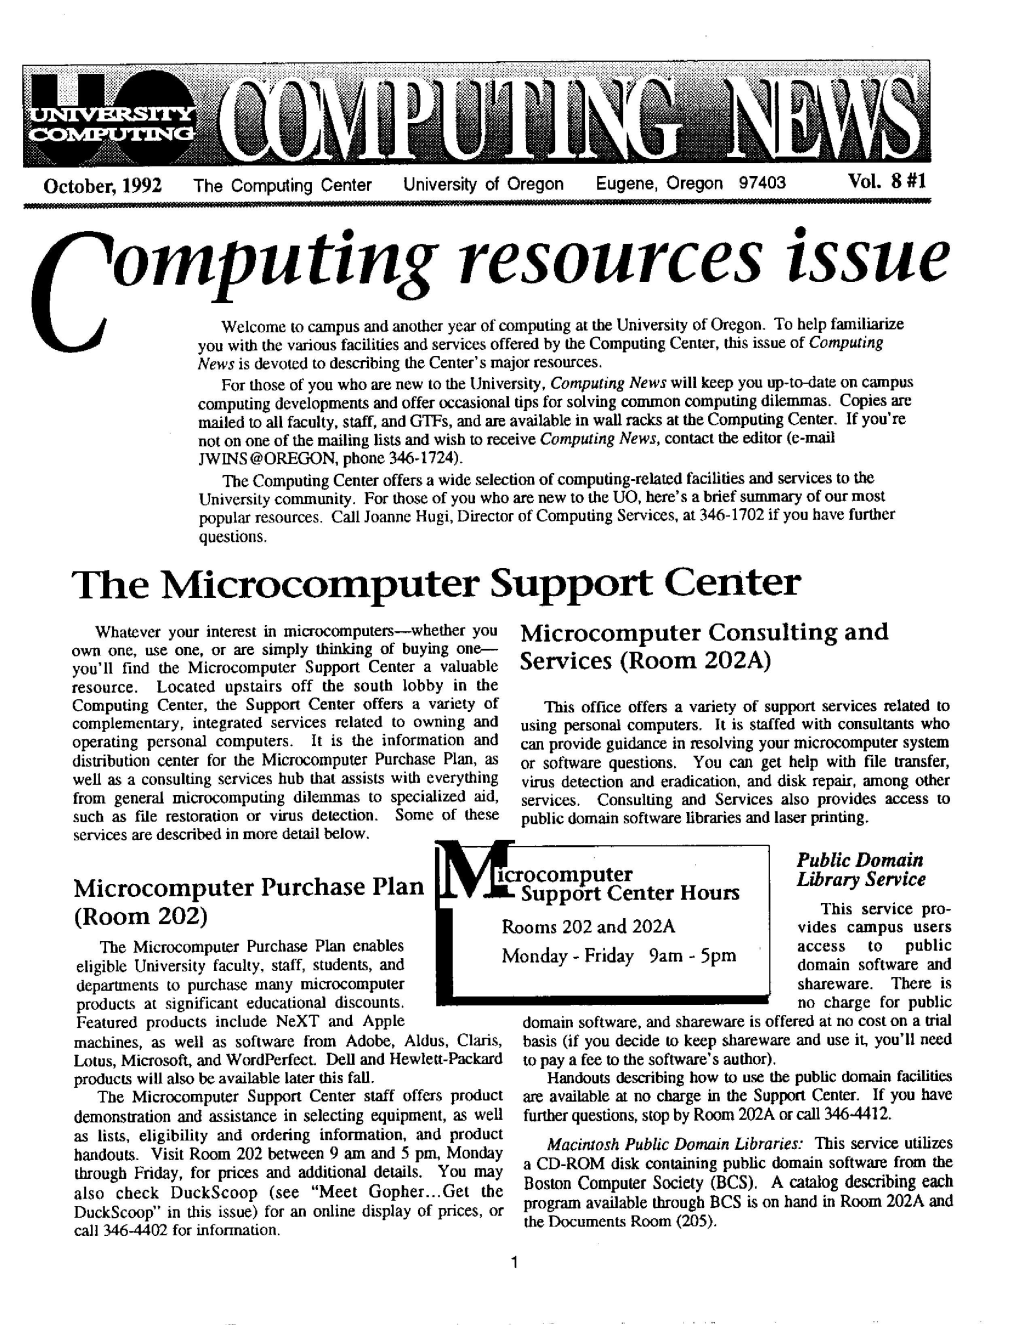 Computing Resources Issue